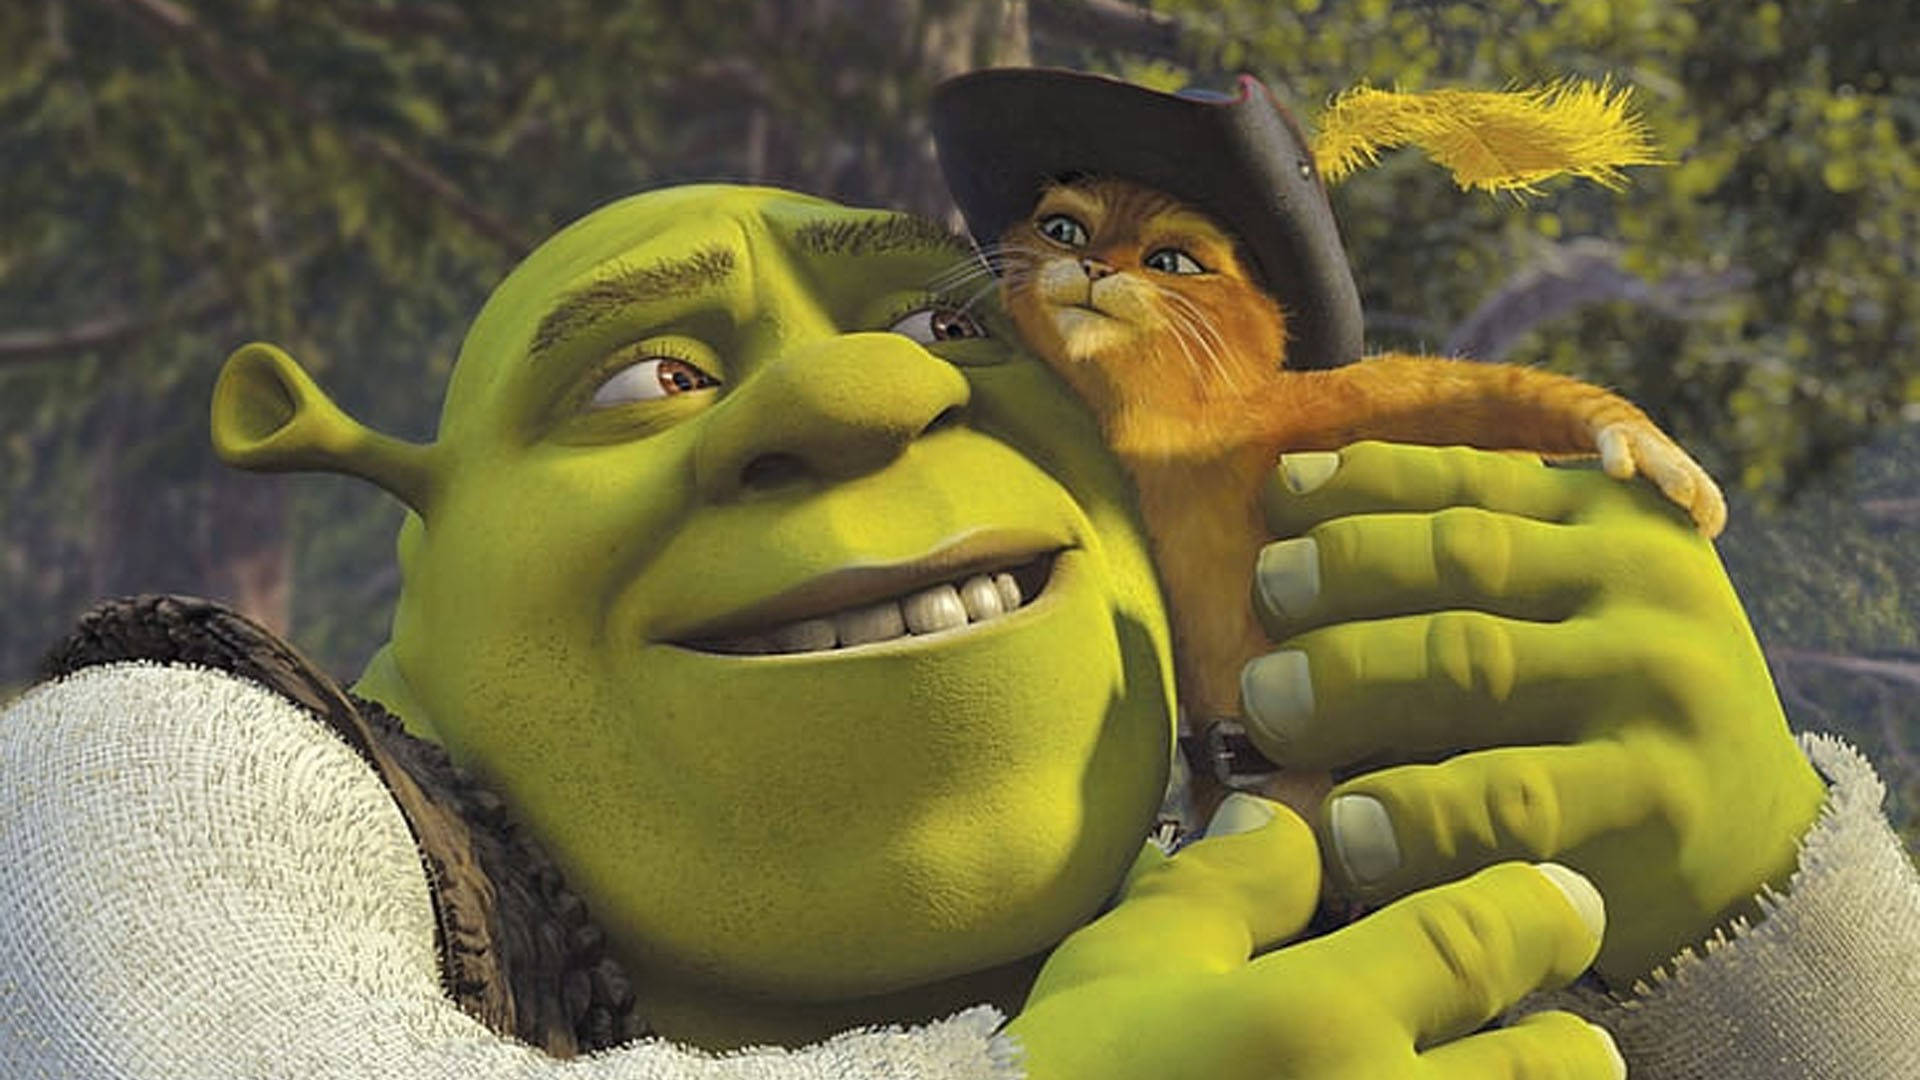 Shrek And Puss In Boots